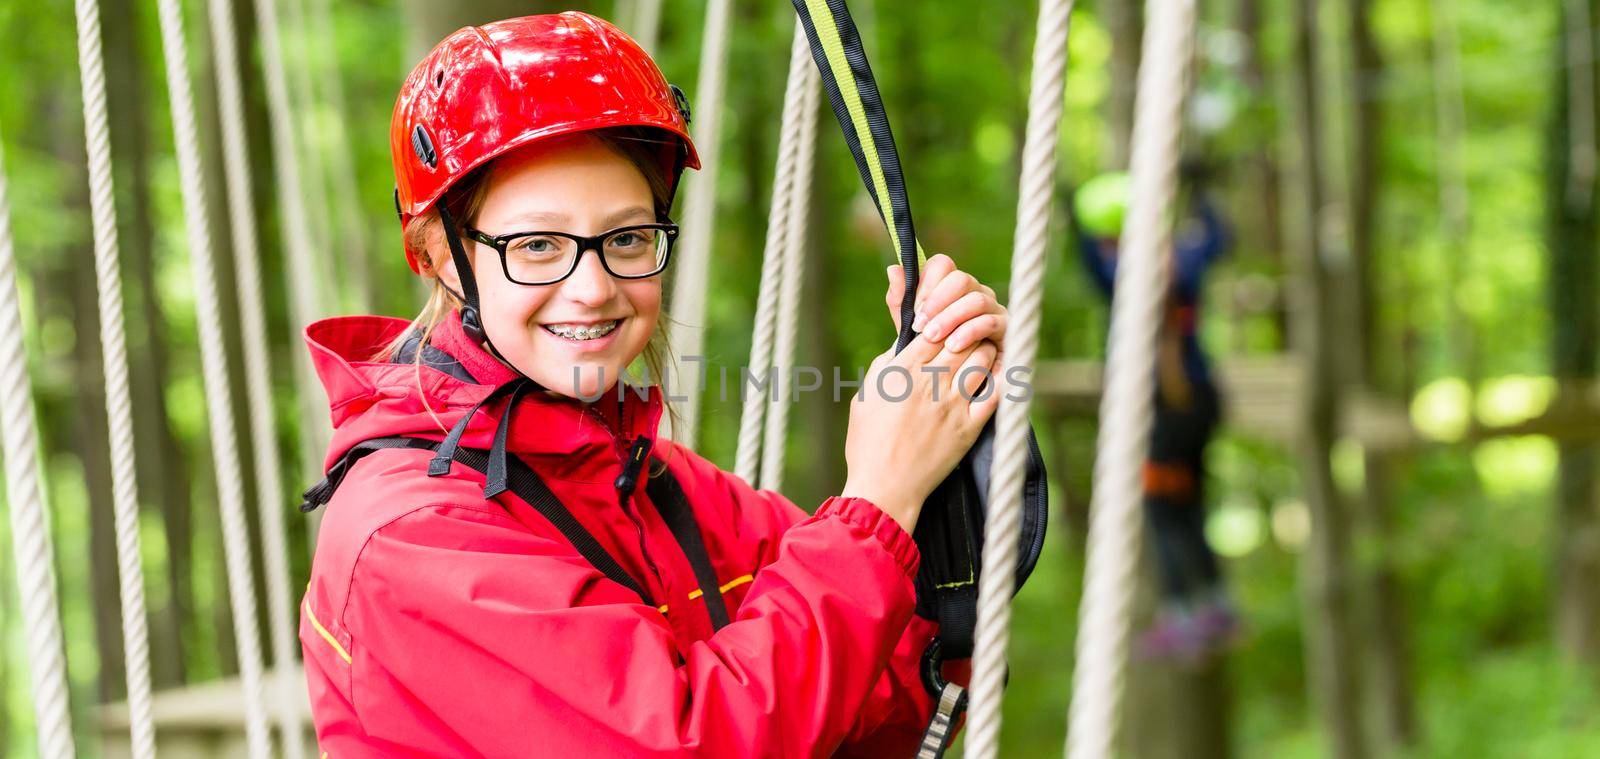 Girl roping up in high rope course exercising the necessary safety precautions